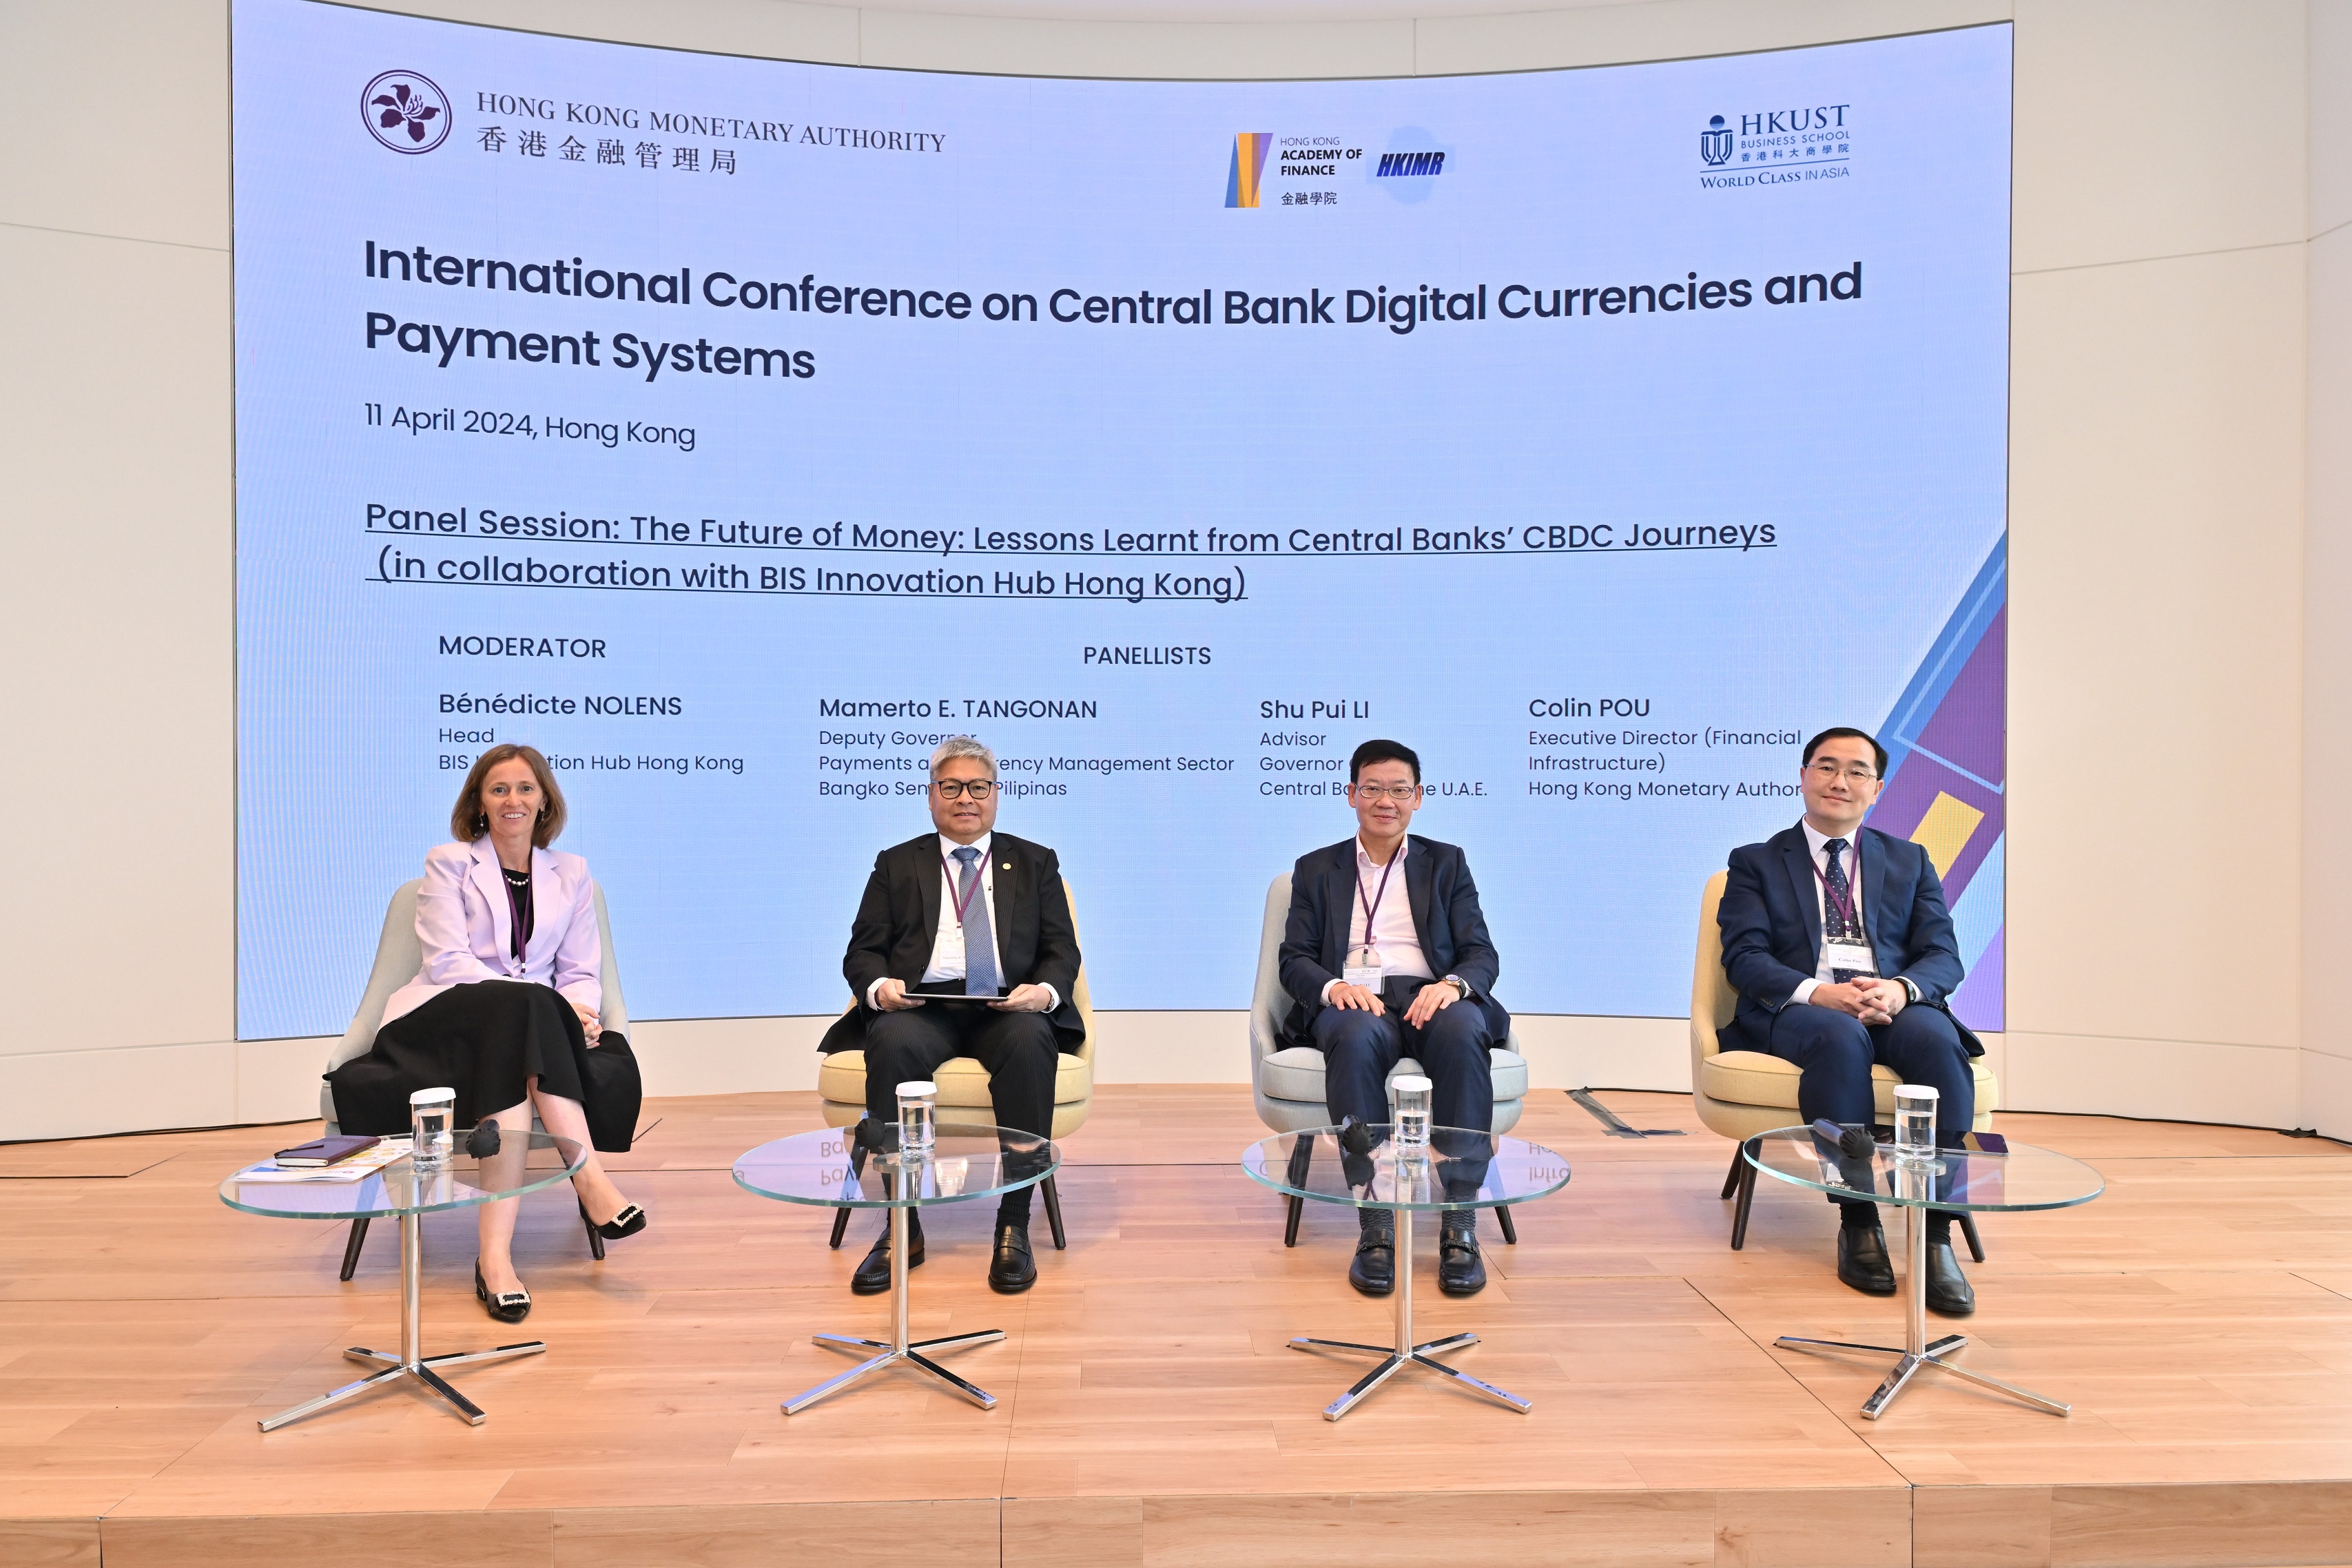 Ms Bénédicte Nolens, Head of BIS Innovation Hub Hong Kong, moderates a panel discussion titled “The Future of Money: Lessons Learnt from Central Banks’ CBDC Journey” with Mr Shu Pui Li, Advisor, Governor Office of Central Bank of the U.A.E.; Mr Colin Pou, Executive Director (Financial Infrastructure) of the Hong Kong Monetary Authority; and Mr Mamerto E. Tangonan, Deputy Governor, Payments and Currency Management Sector of Bangko Sentral ng Pilipinas.